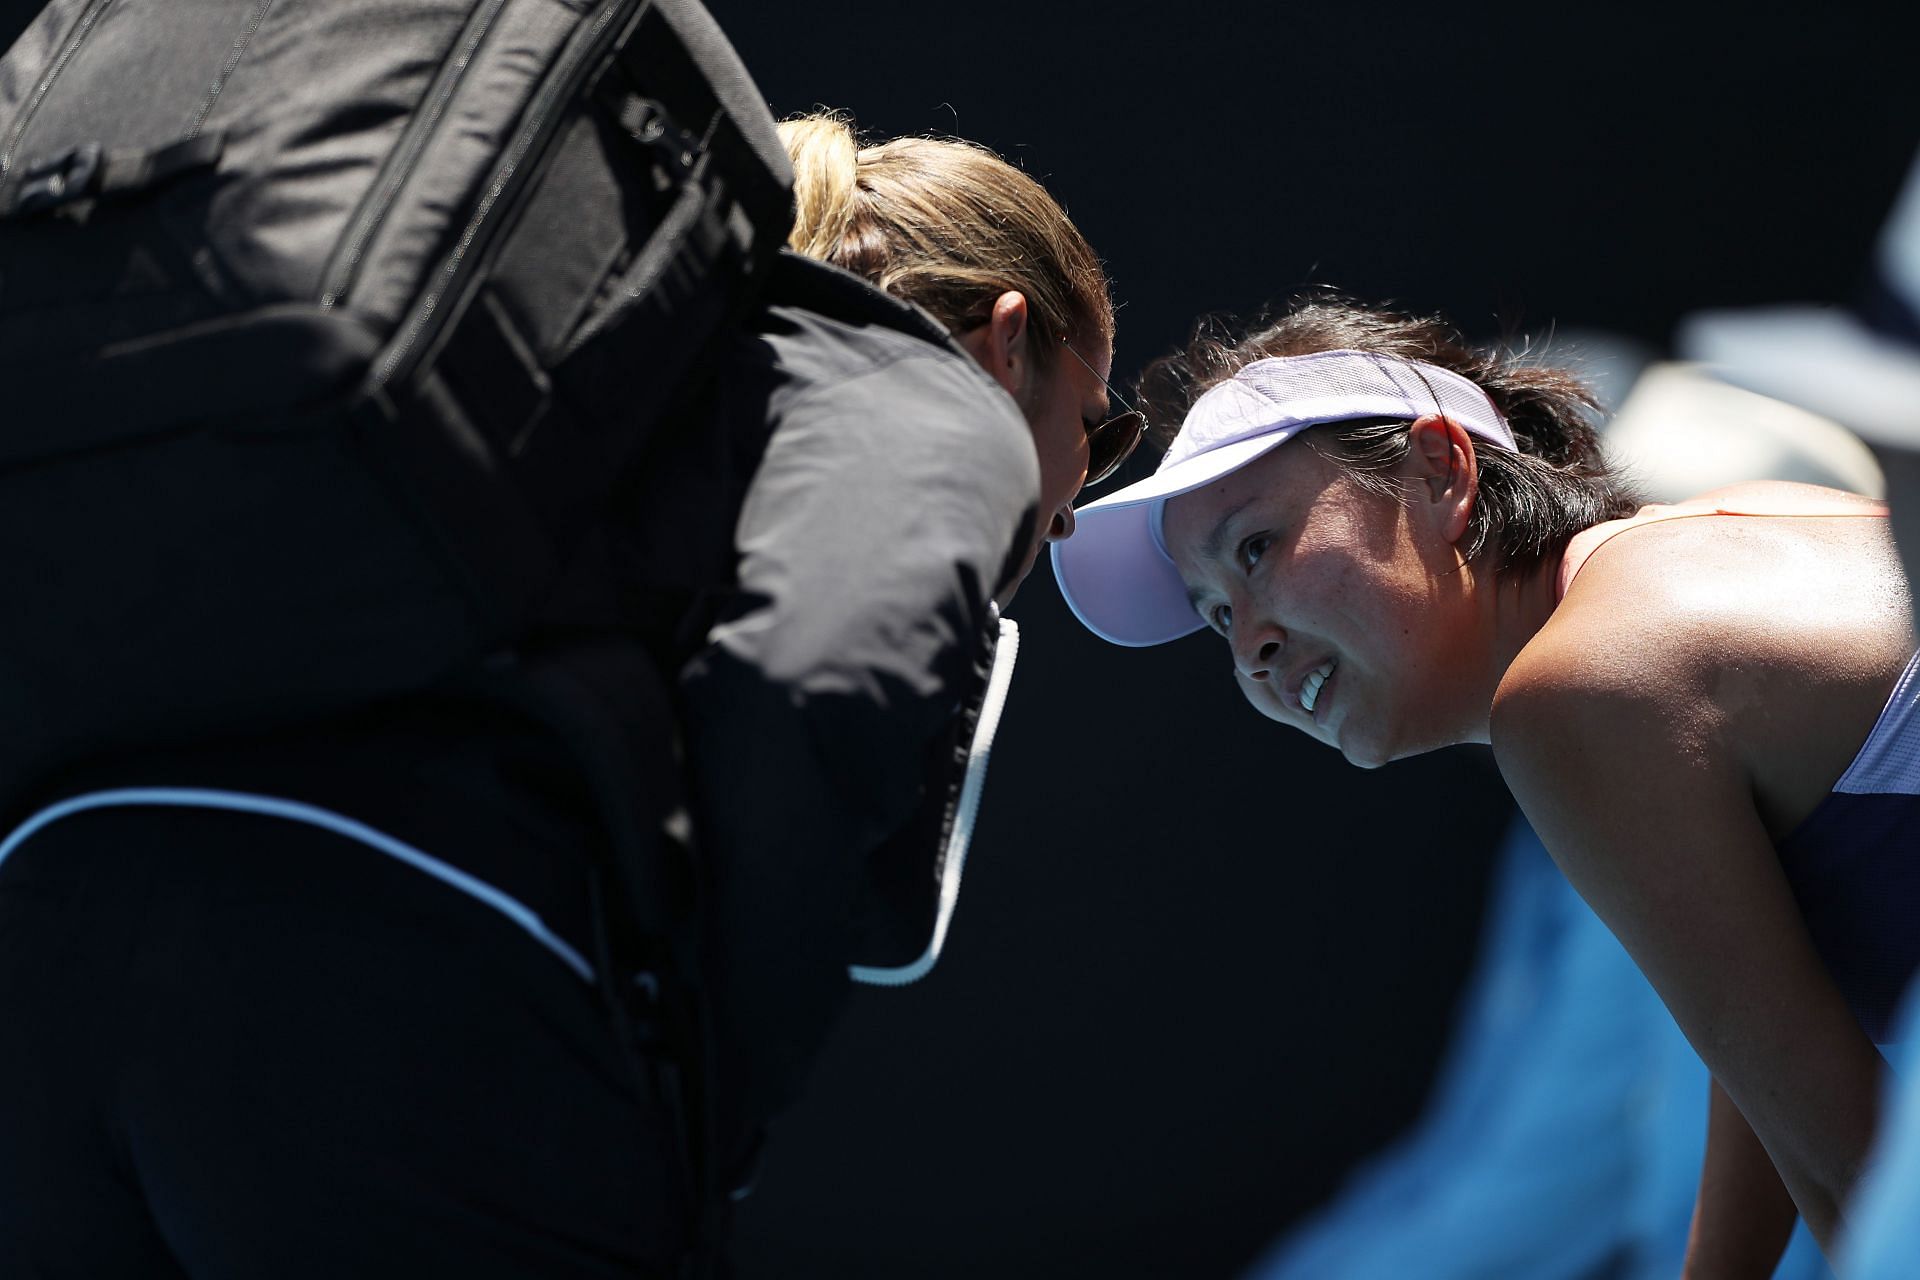 Peng Shuai has not made any public appearances since coming forward with her allegations.